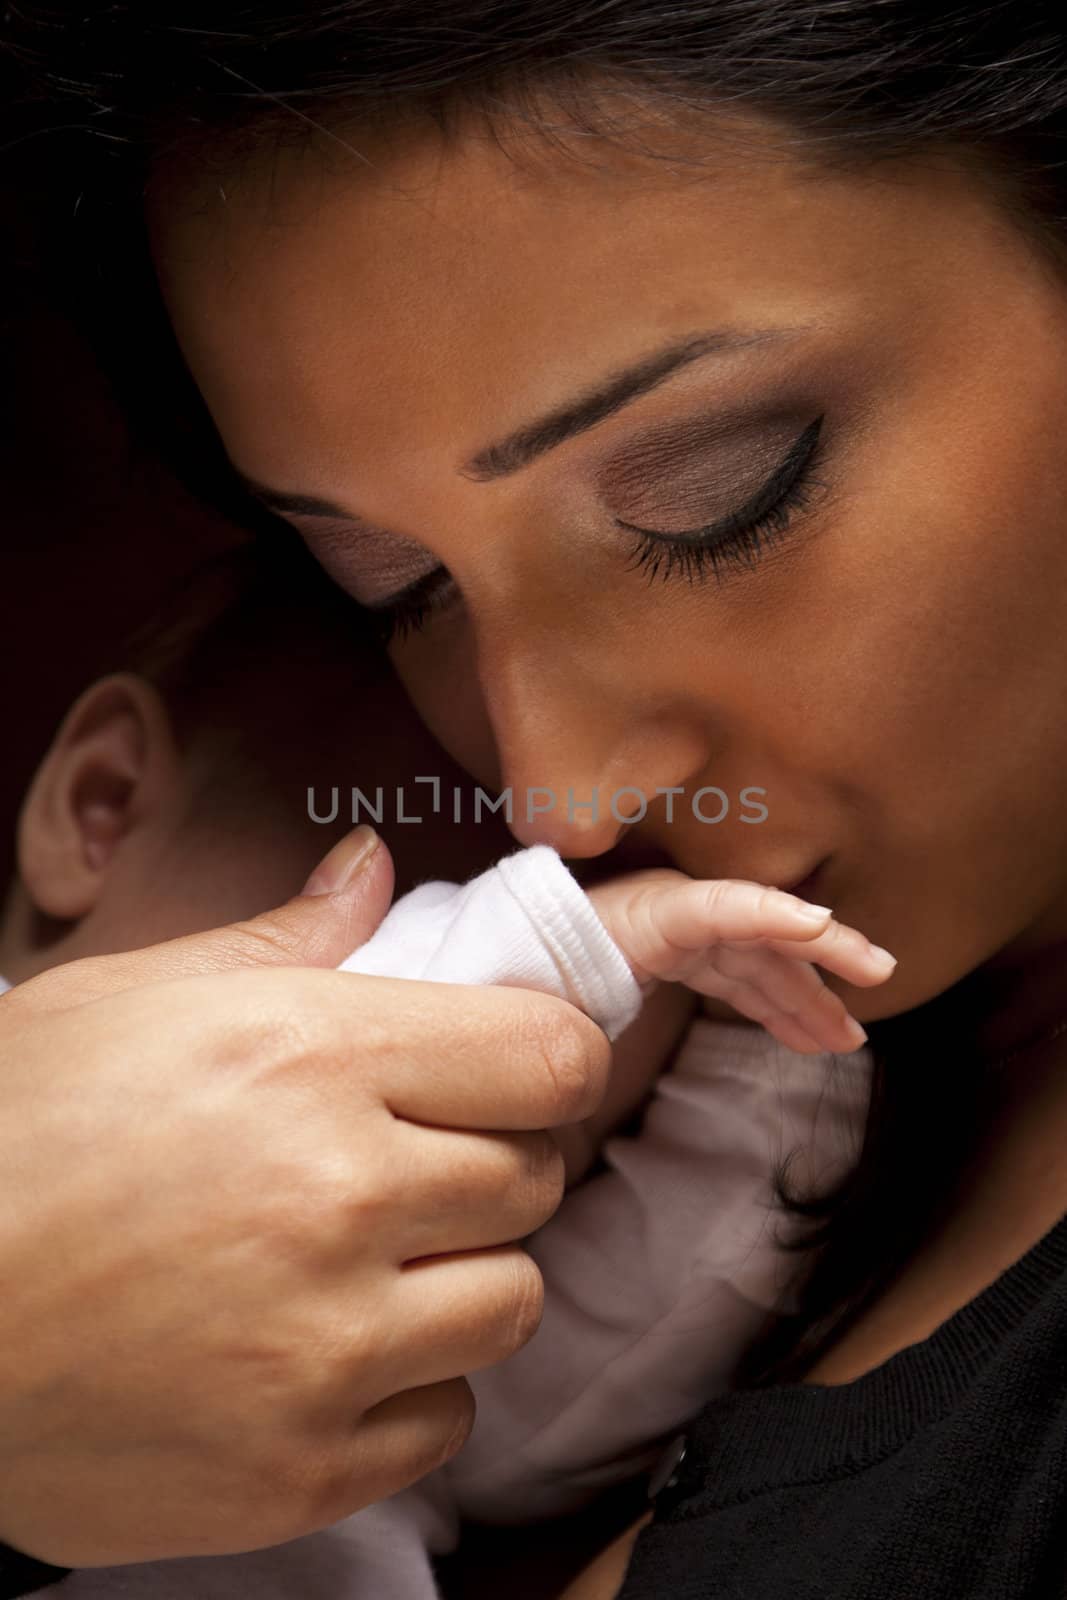 Young Attractive Ethnic Woman Kisses Her Newborn Baby Hand Under Dramatic Lighting.